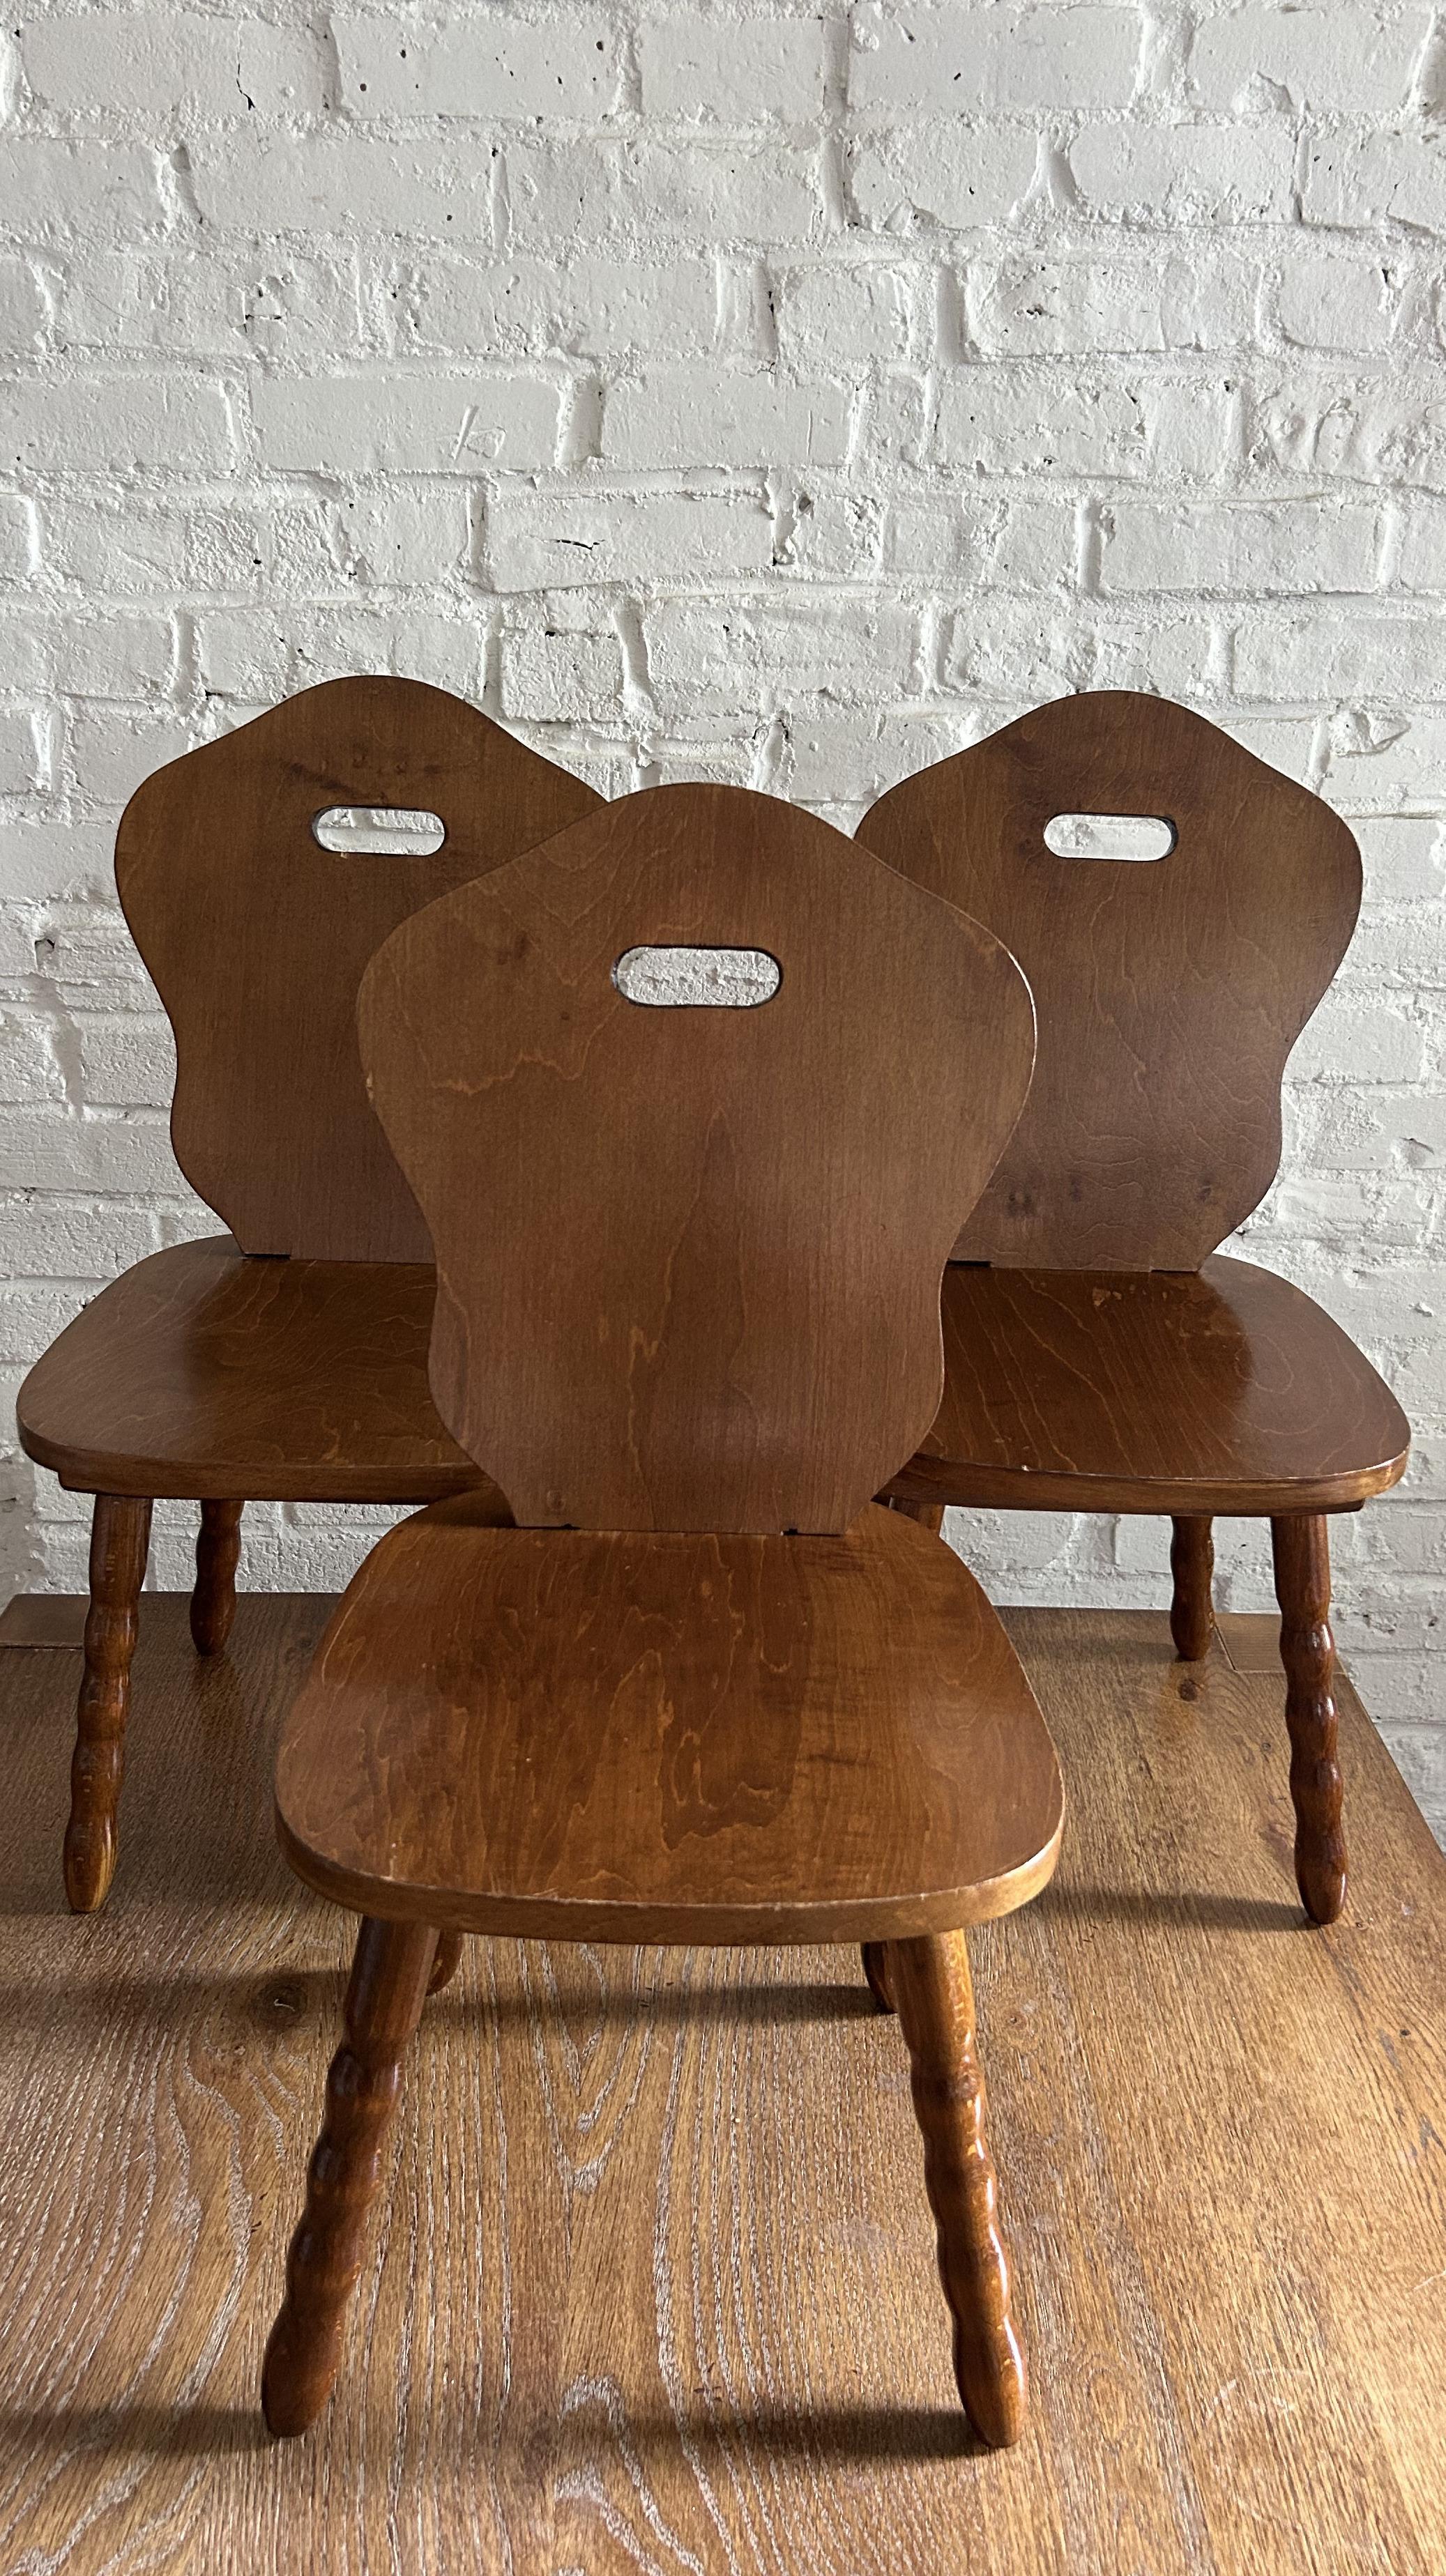 Set of 3 adorable solid wood children's chairs. Features a carved solid back and seat atop four turned legs. While originally a children's chair, they would be best now as a decorative stool in a living room, entry way, bedroom or bathroom. The